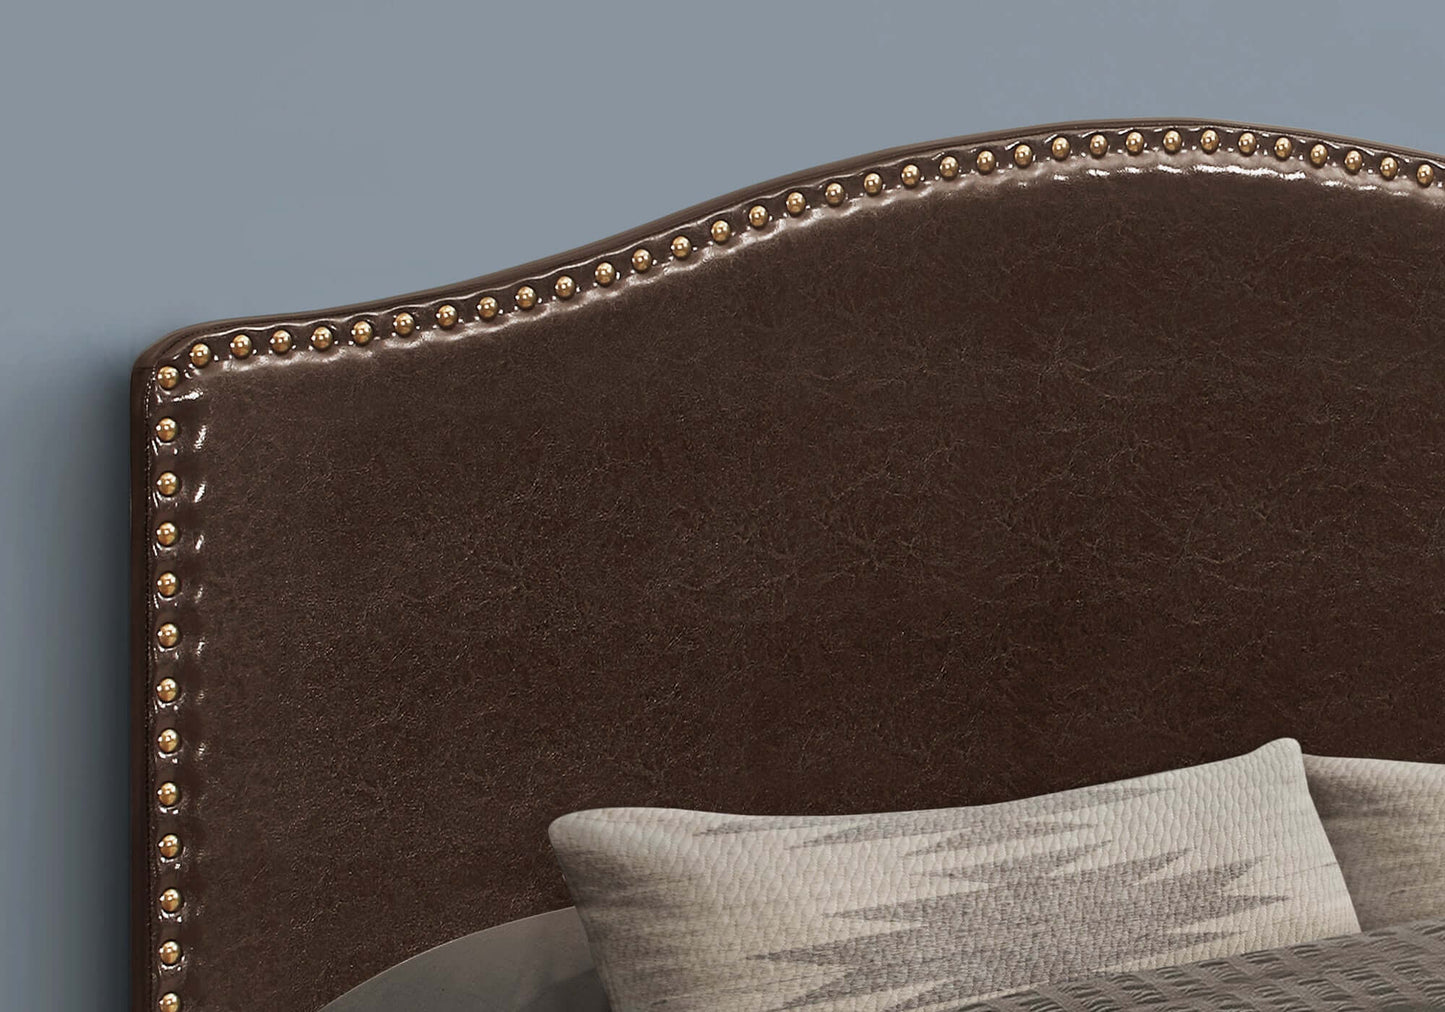 Monarch Specialties - Transitional Upholstered Arched Top Headboard in Brown Leather-Look Fabric - I 6010F